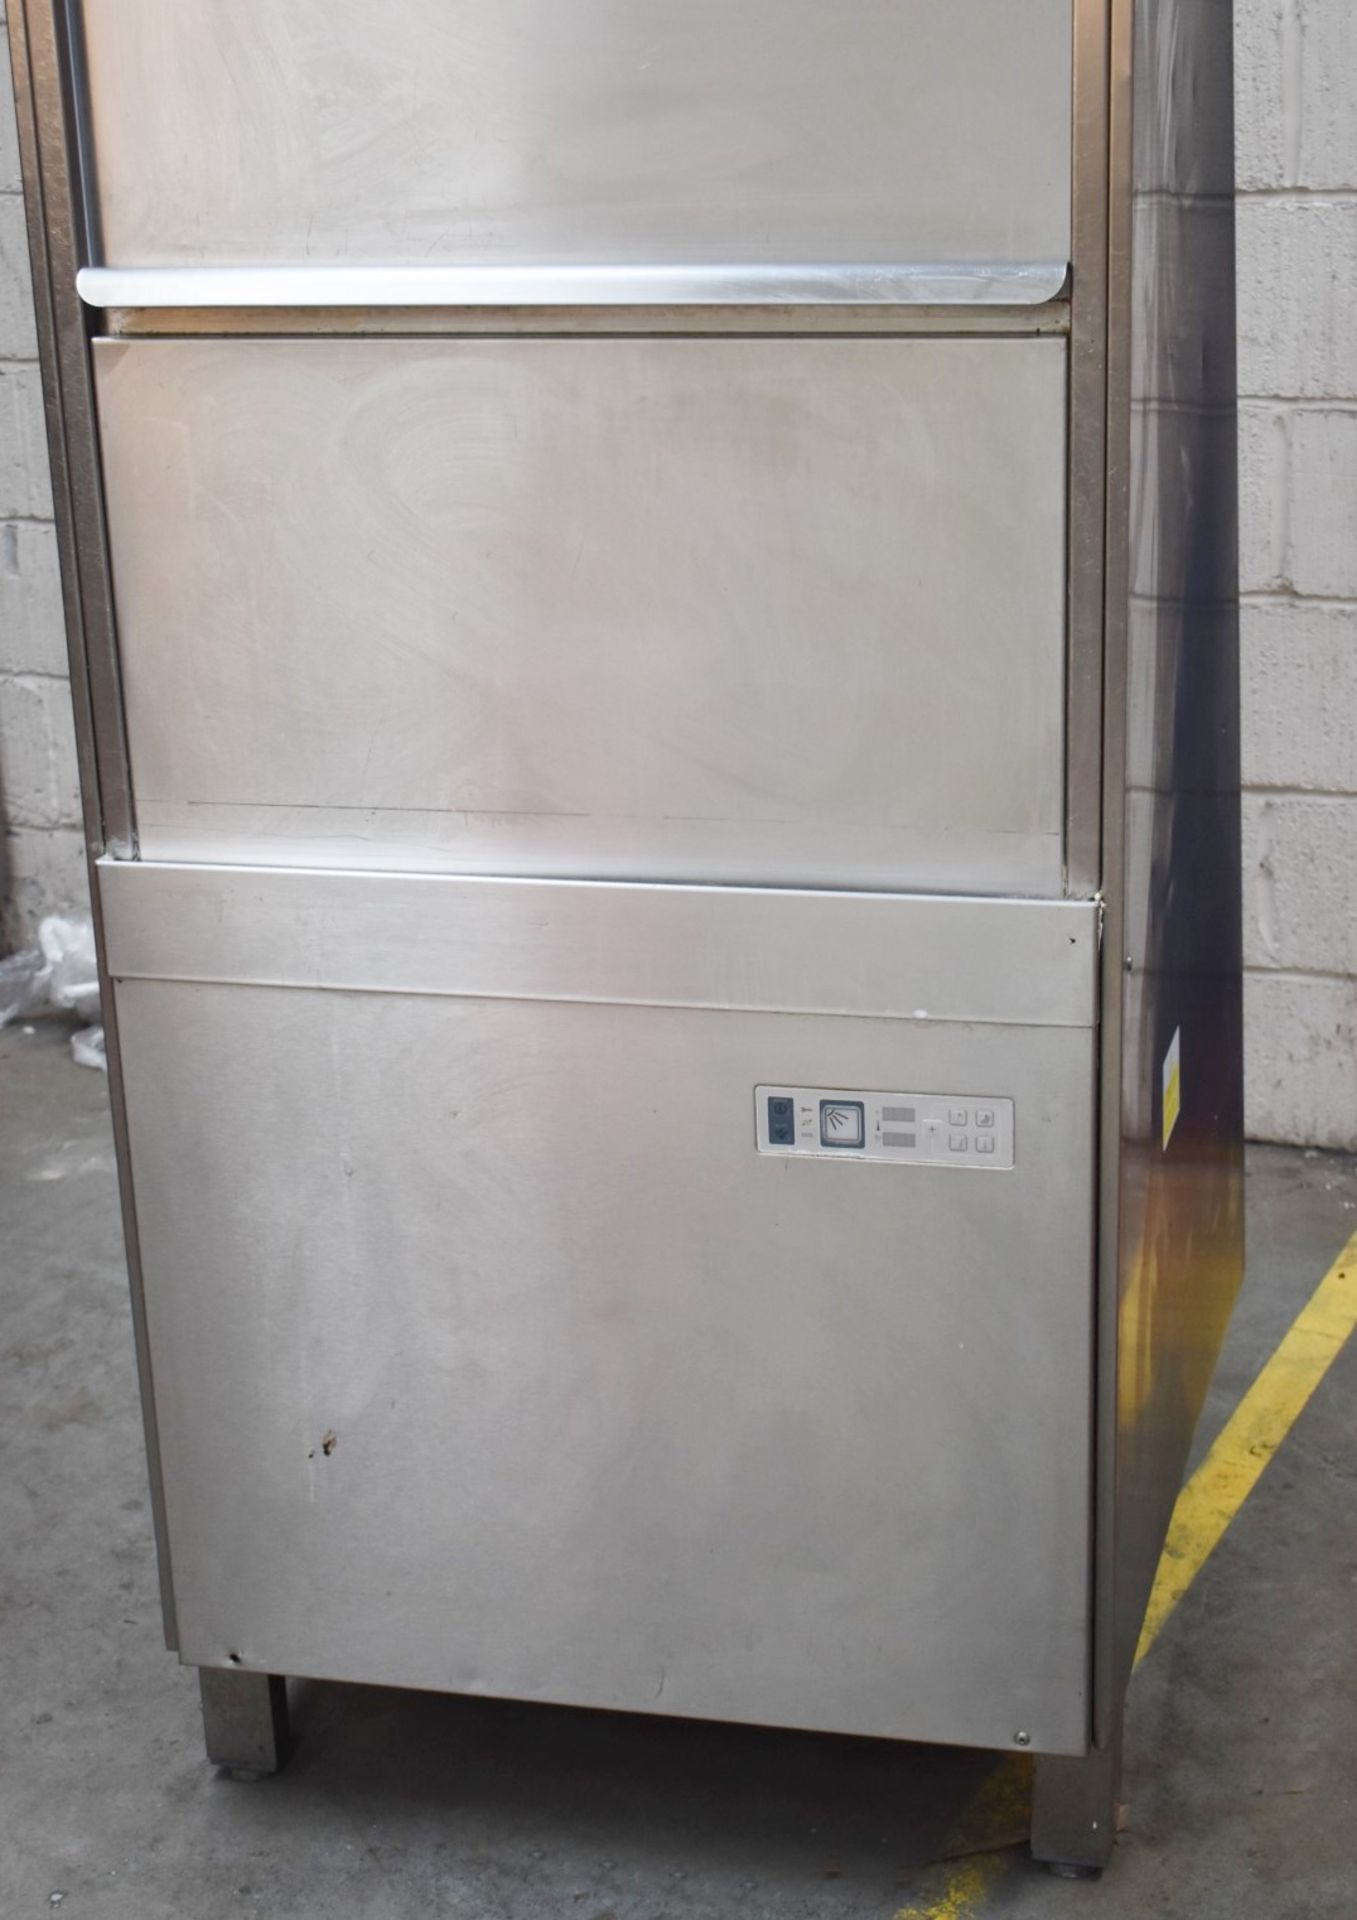 1 x Winterhalter GS640 Utensil Pot Washer - 3 Phase - Recently Removed From Major Supermarket Chain - Image 9 of 11